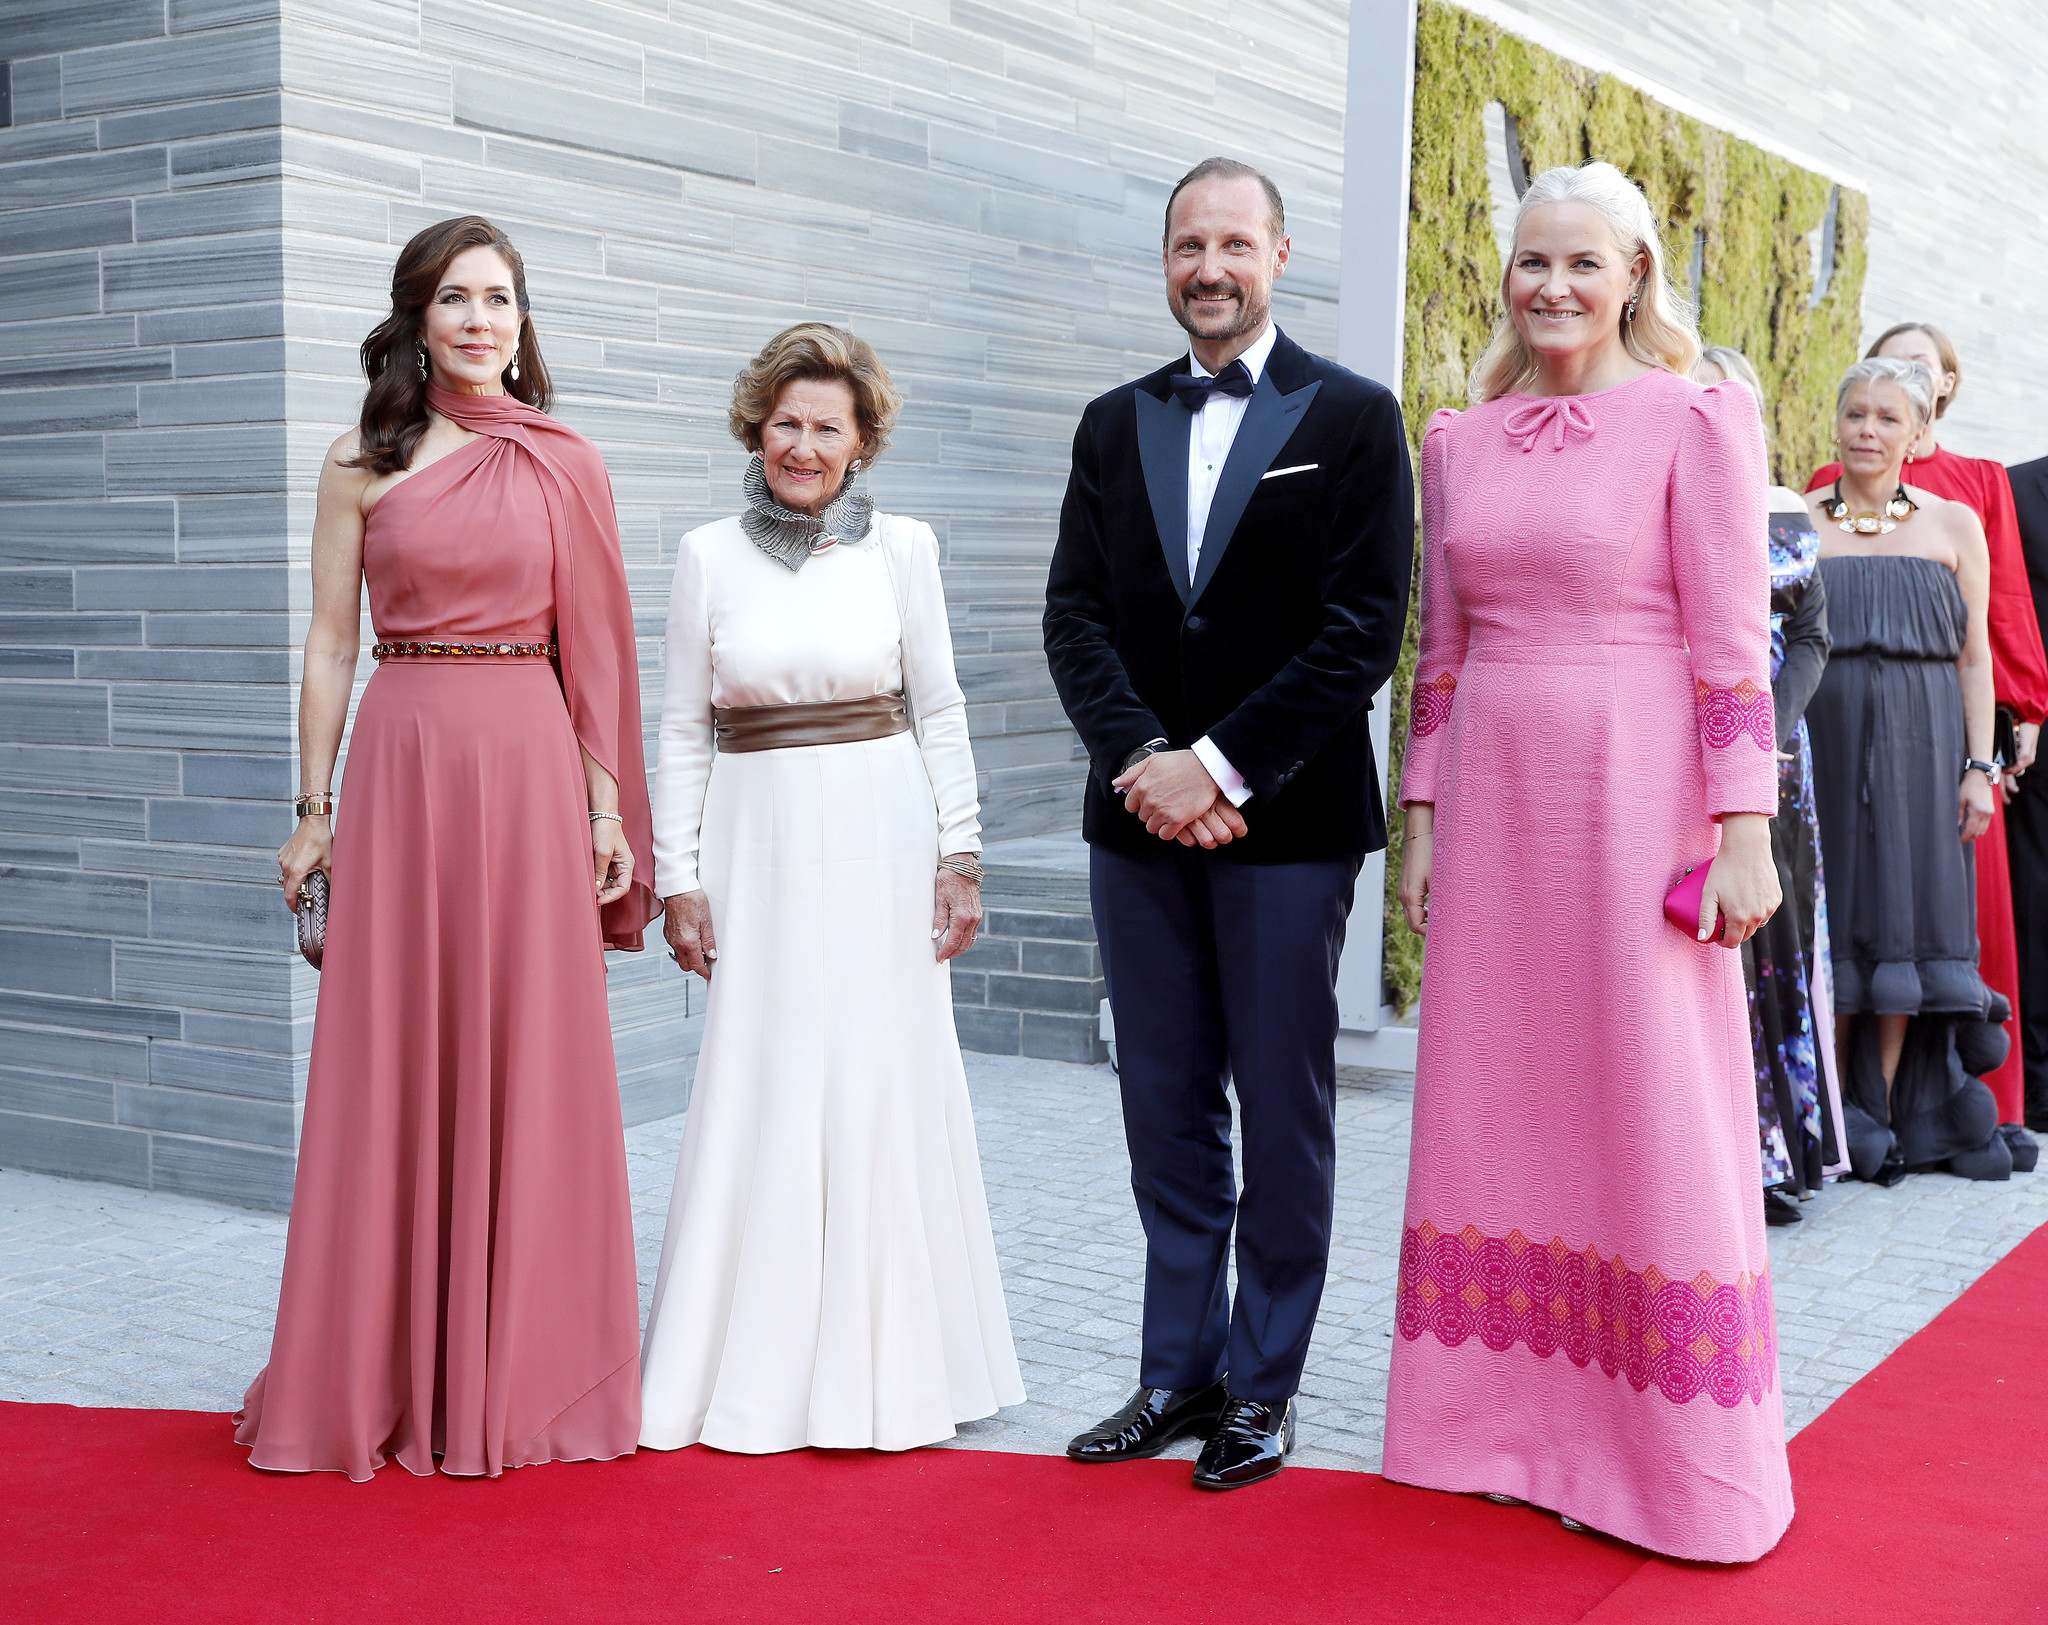 Mary of Denmark, Queen Sonia, Hakoon of Norway and his wife Mette-Marit.